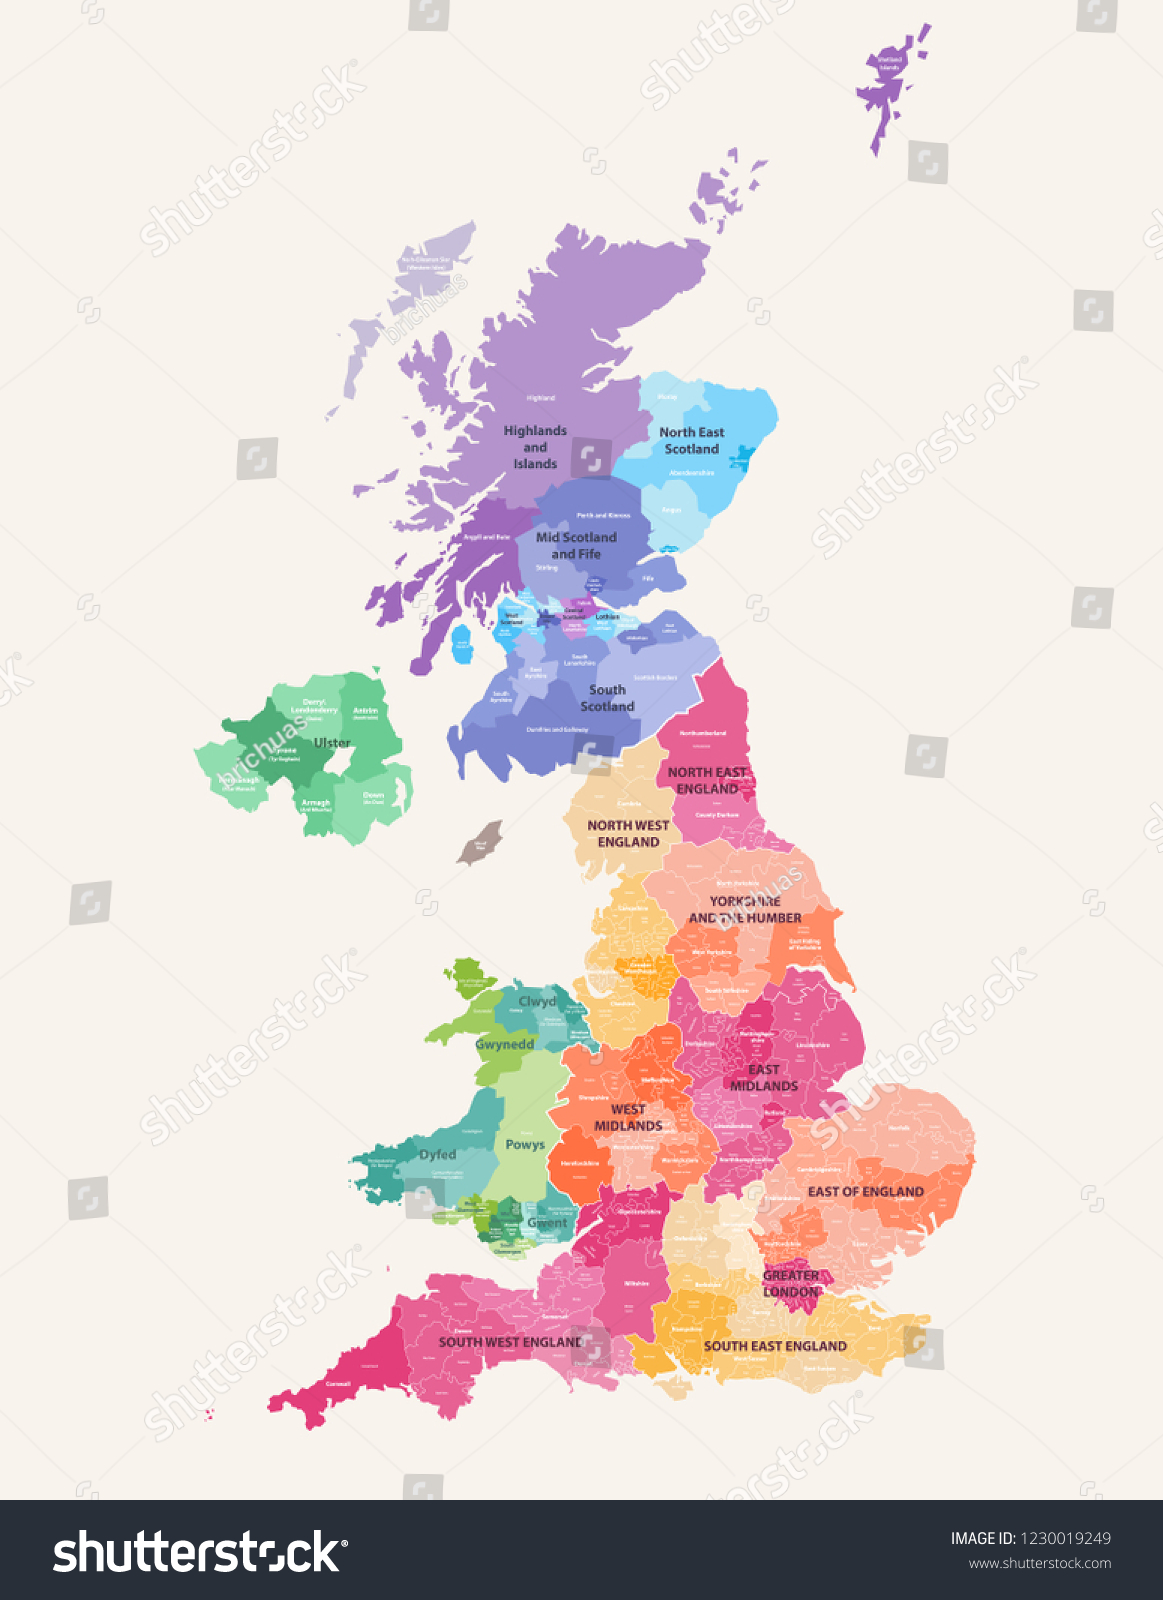 SVG of United Kingdom administrative districts high detailed vector map colored by regions with editable and labelled layers svg